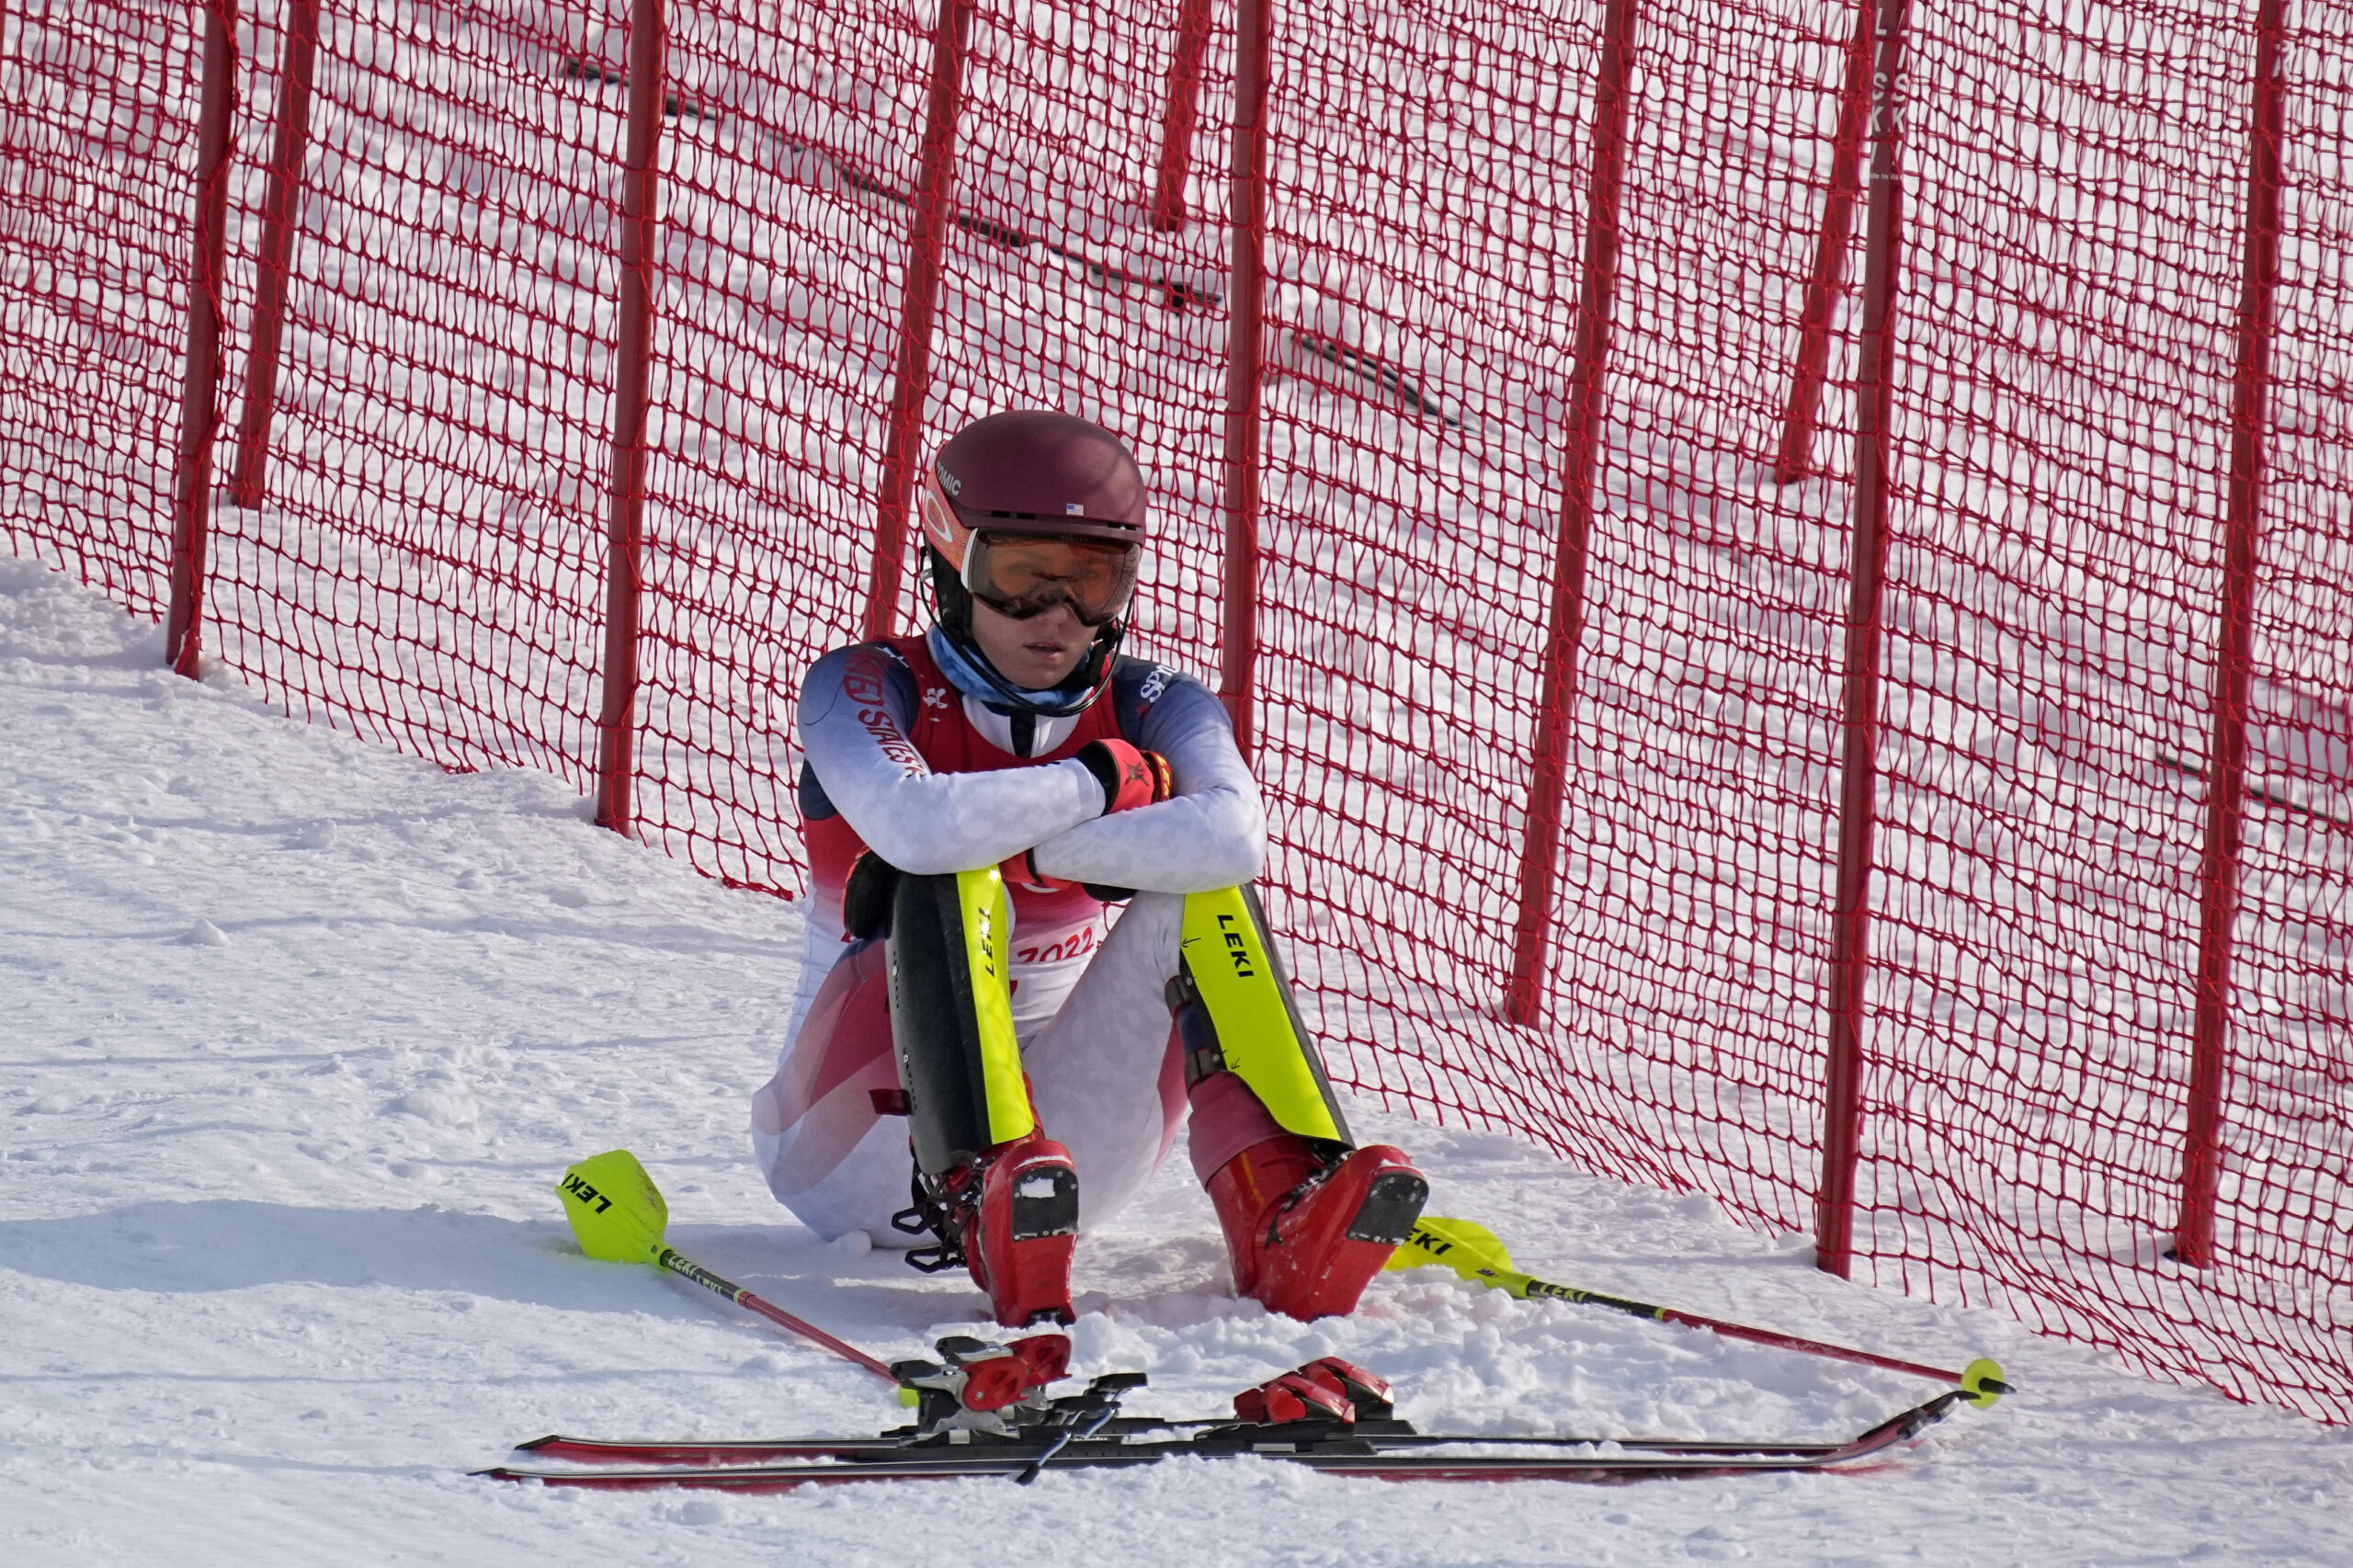 Mikaela Shiffrin, of the U.S, sits on the side of the course